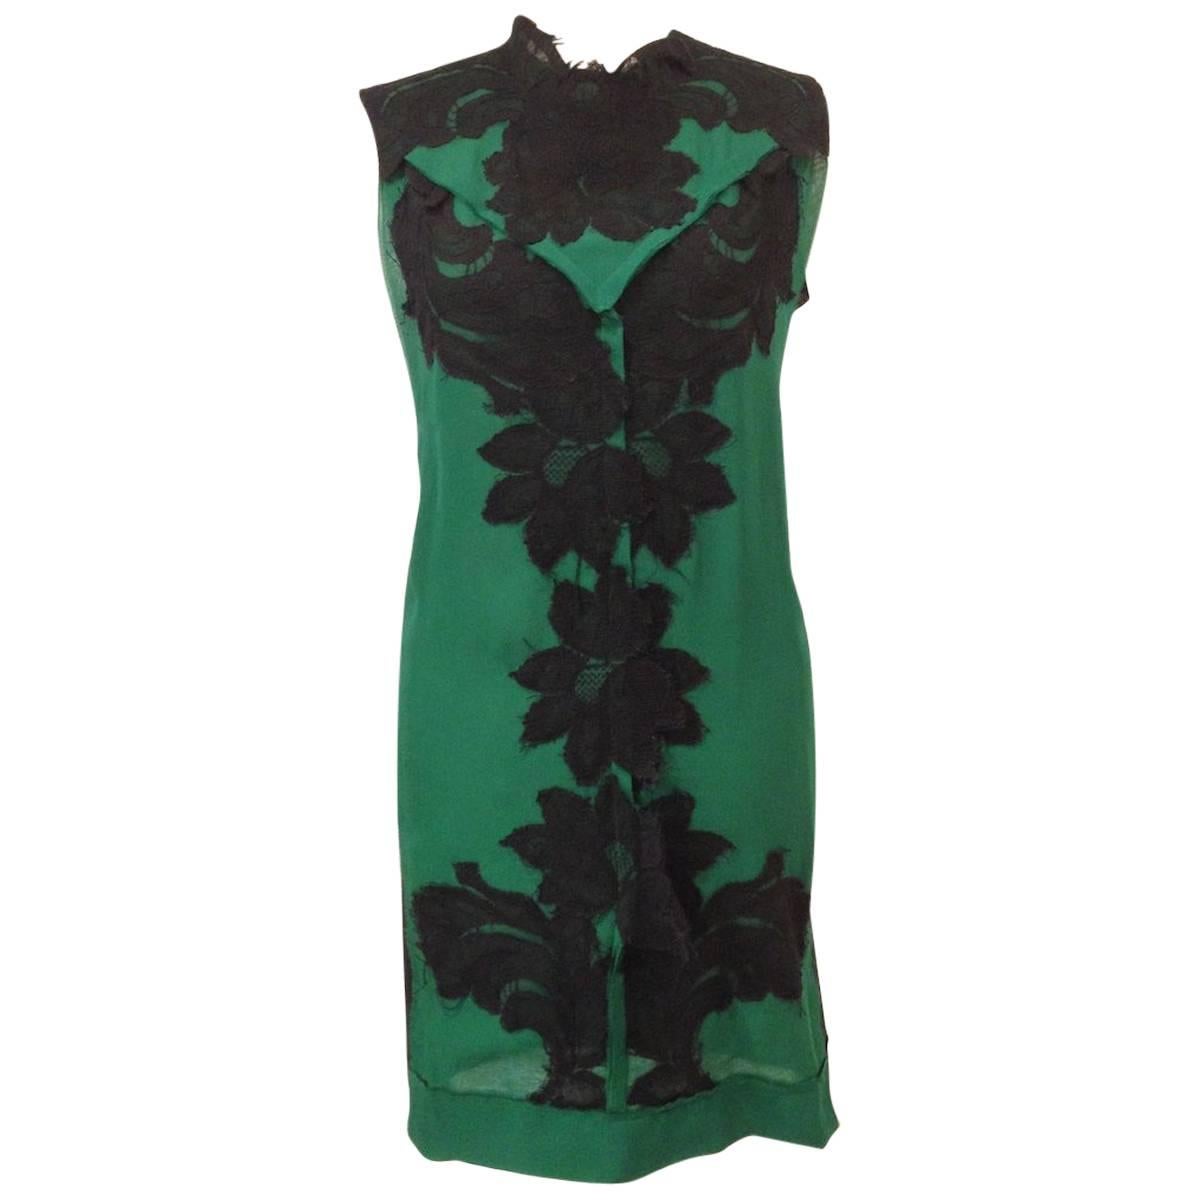  LANVIN Sleeveless Cocktail Dress 'Les 10 ans' in Black and Green Silk Size 36FR For Sale